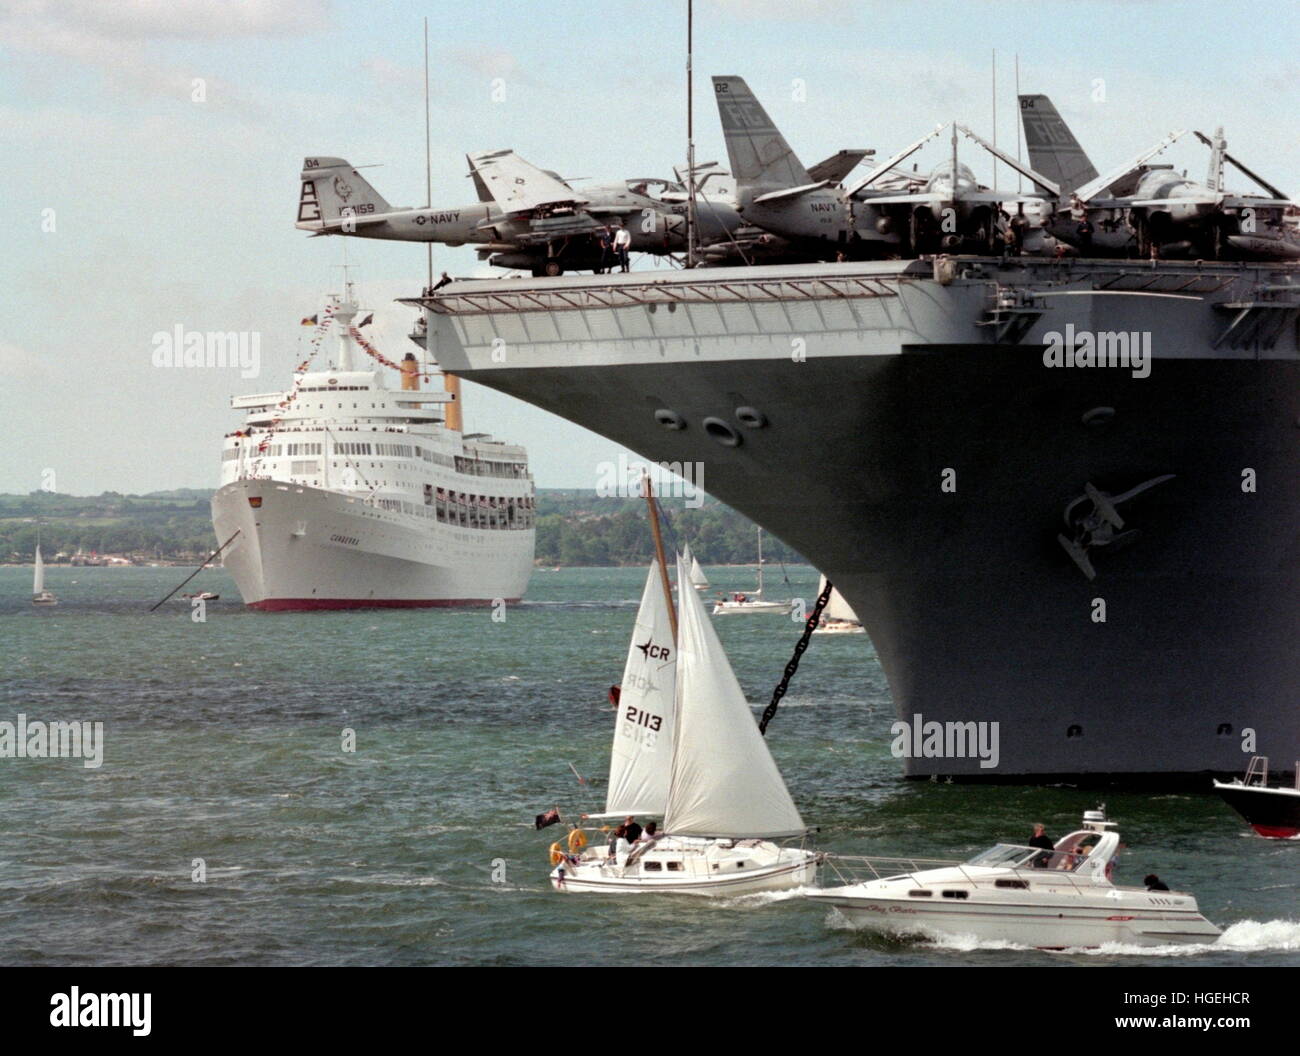 AJAXNETPHOTO. 5TH JUNE, 1994. SPITHEAD, ENGLAND. - 50TH D-DAY ANNIVERSARY FLEET - AIRCRAFT CROWD THE FLIGHT DECK OF AMERICAN CARRIER GEORGE WASHINGTON FOR THE ROYAL REVIEW. PHOTO;JONATHAN EASTLAND/AJAX REF:940506 7 Stock Photo